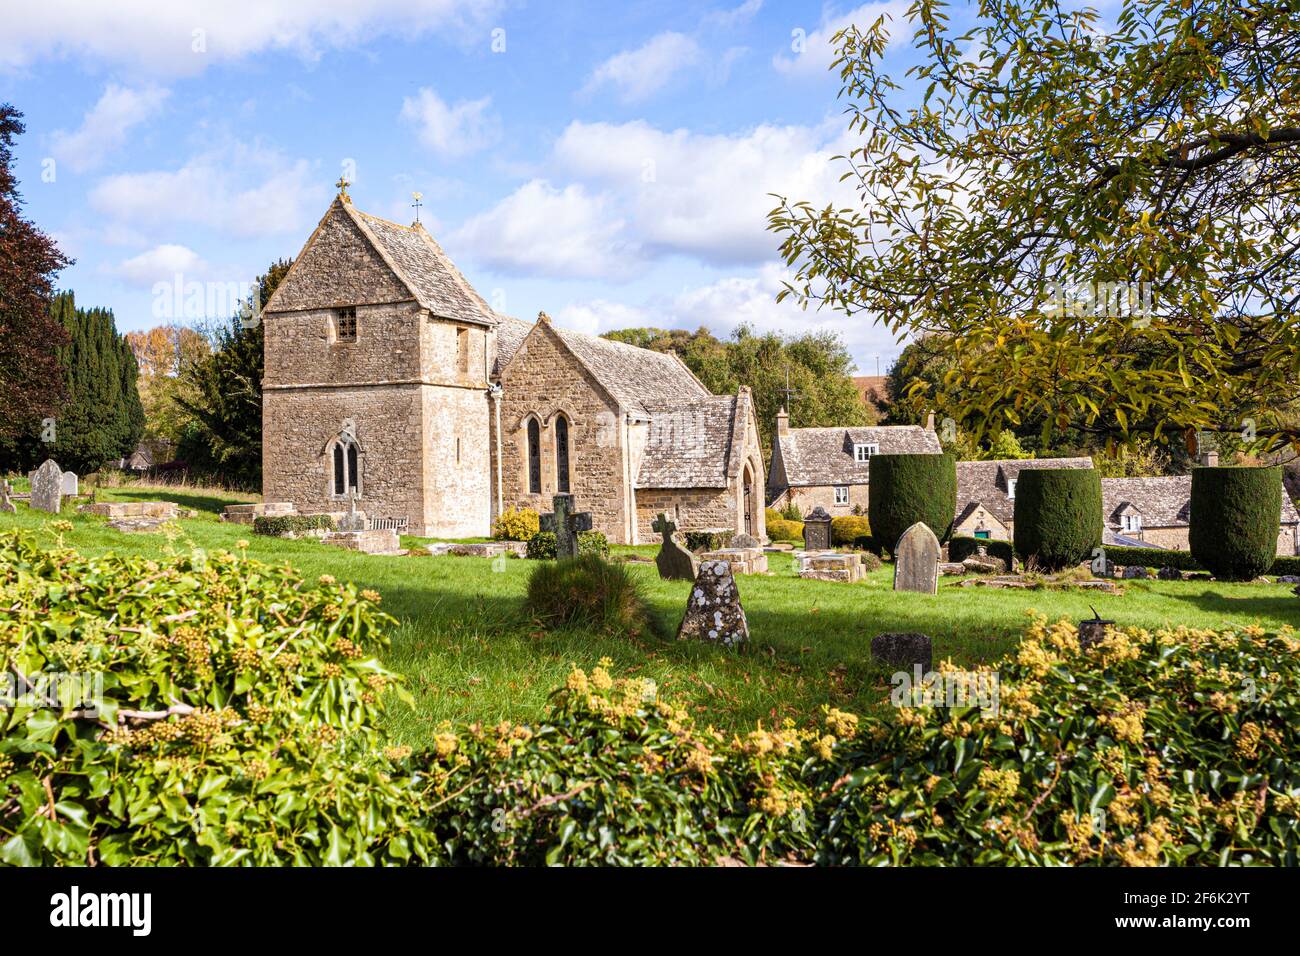 Autumn at St Peters church in the Cotswold village of Duntisbourne Abbots, Gloucestershire UK Stock Photo